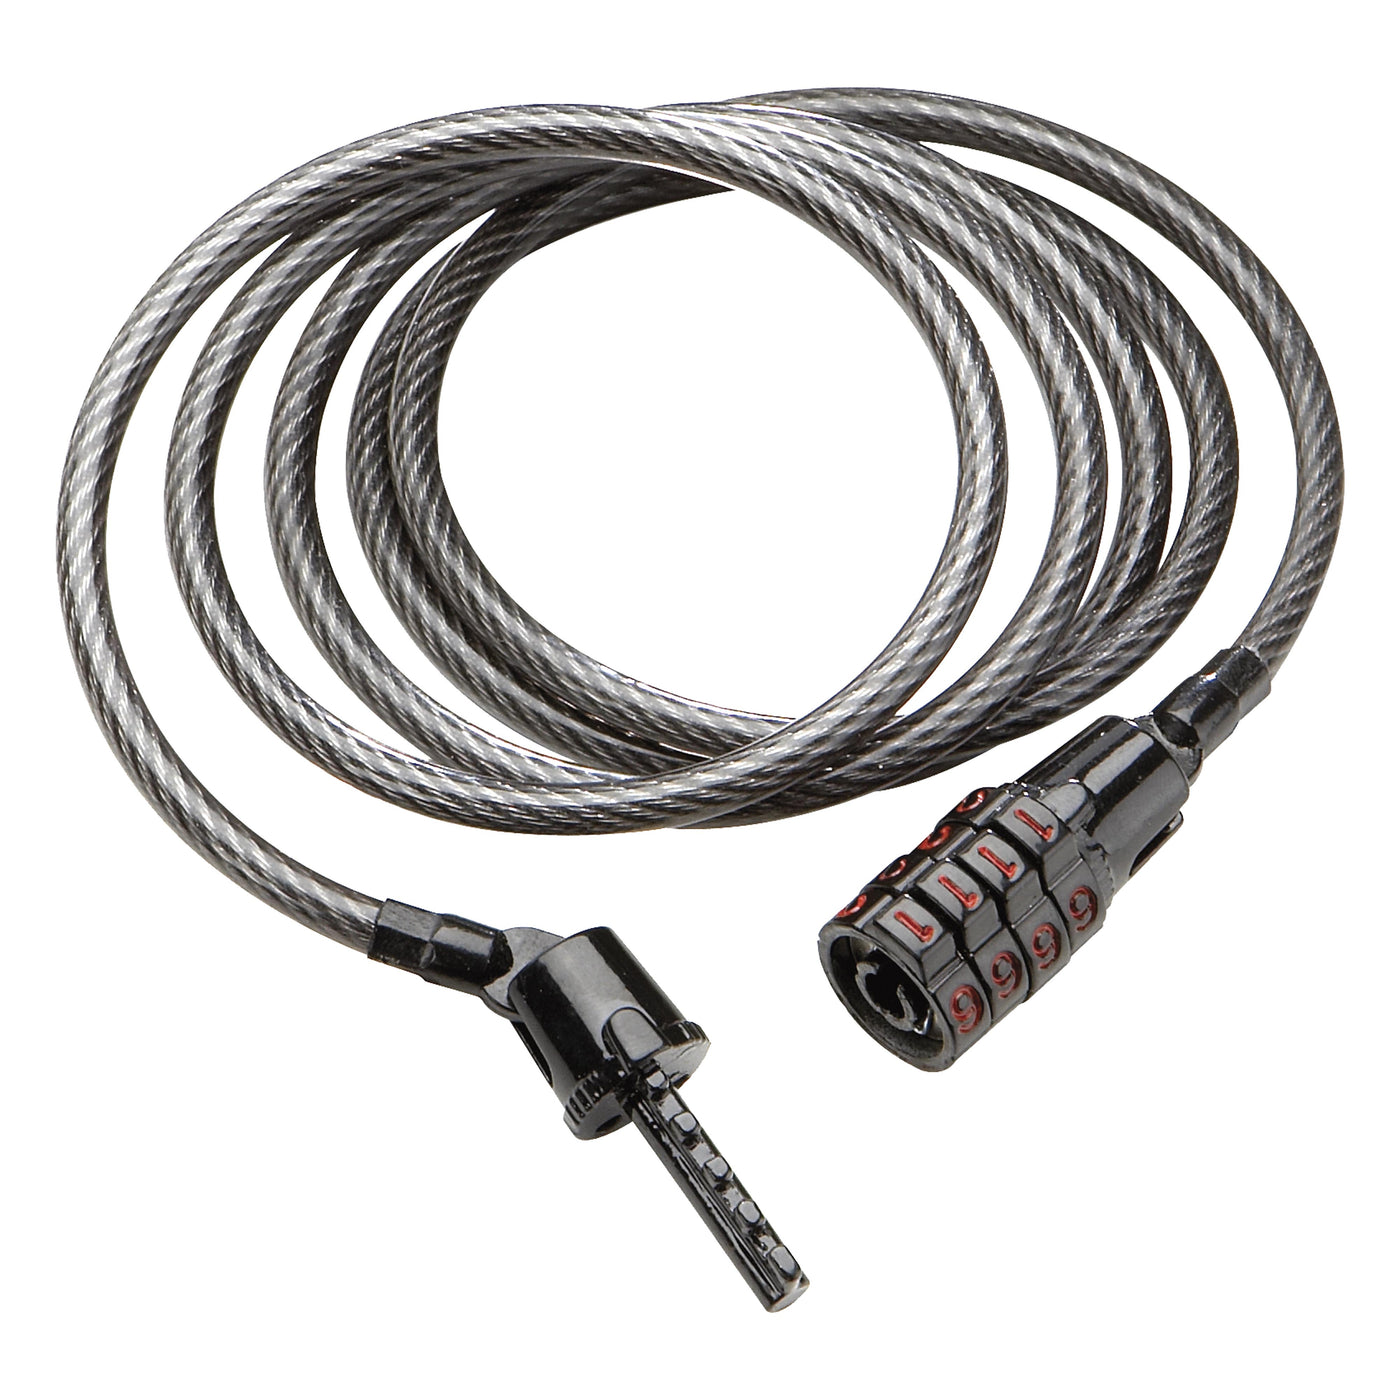 Kryptonite Keeper 512 Combo Cable (5 mm X 120 cm)